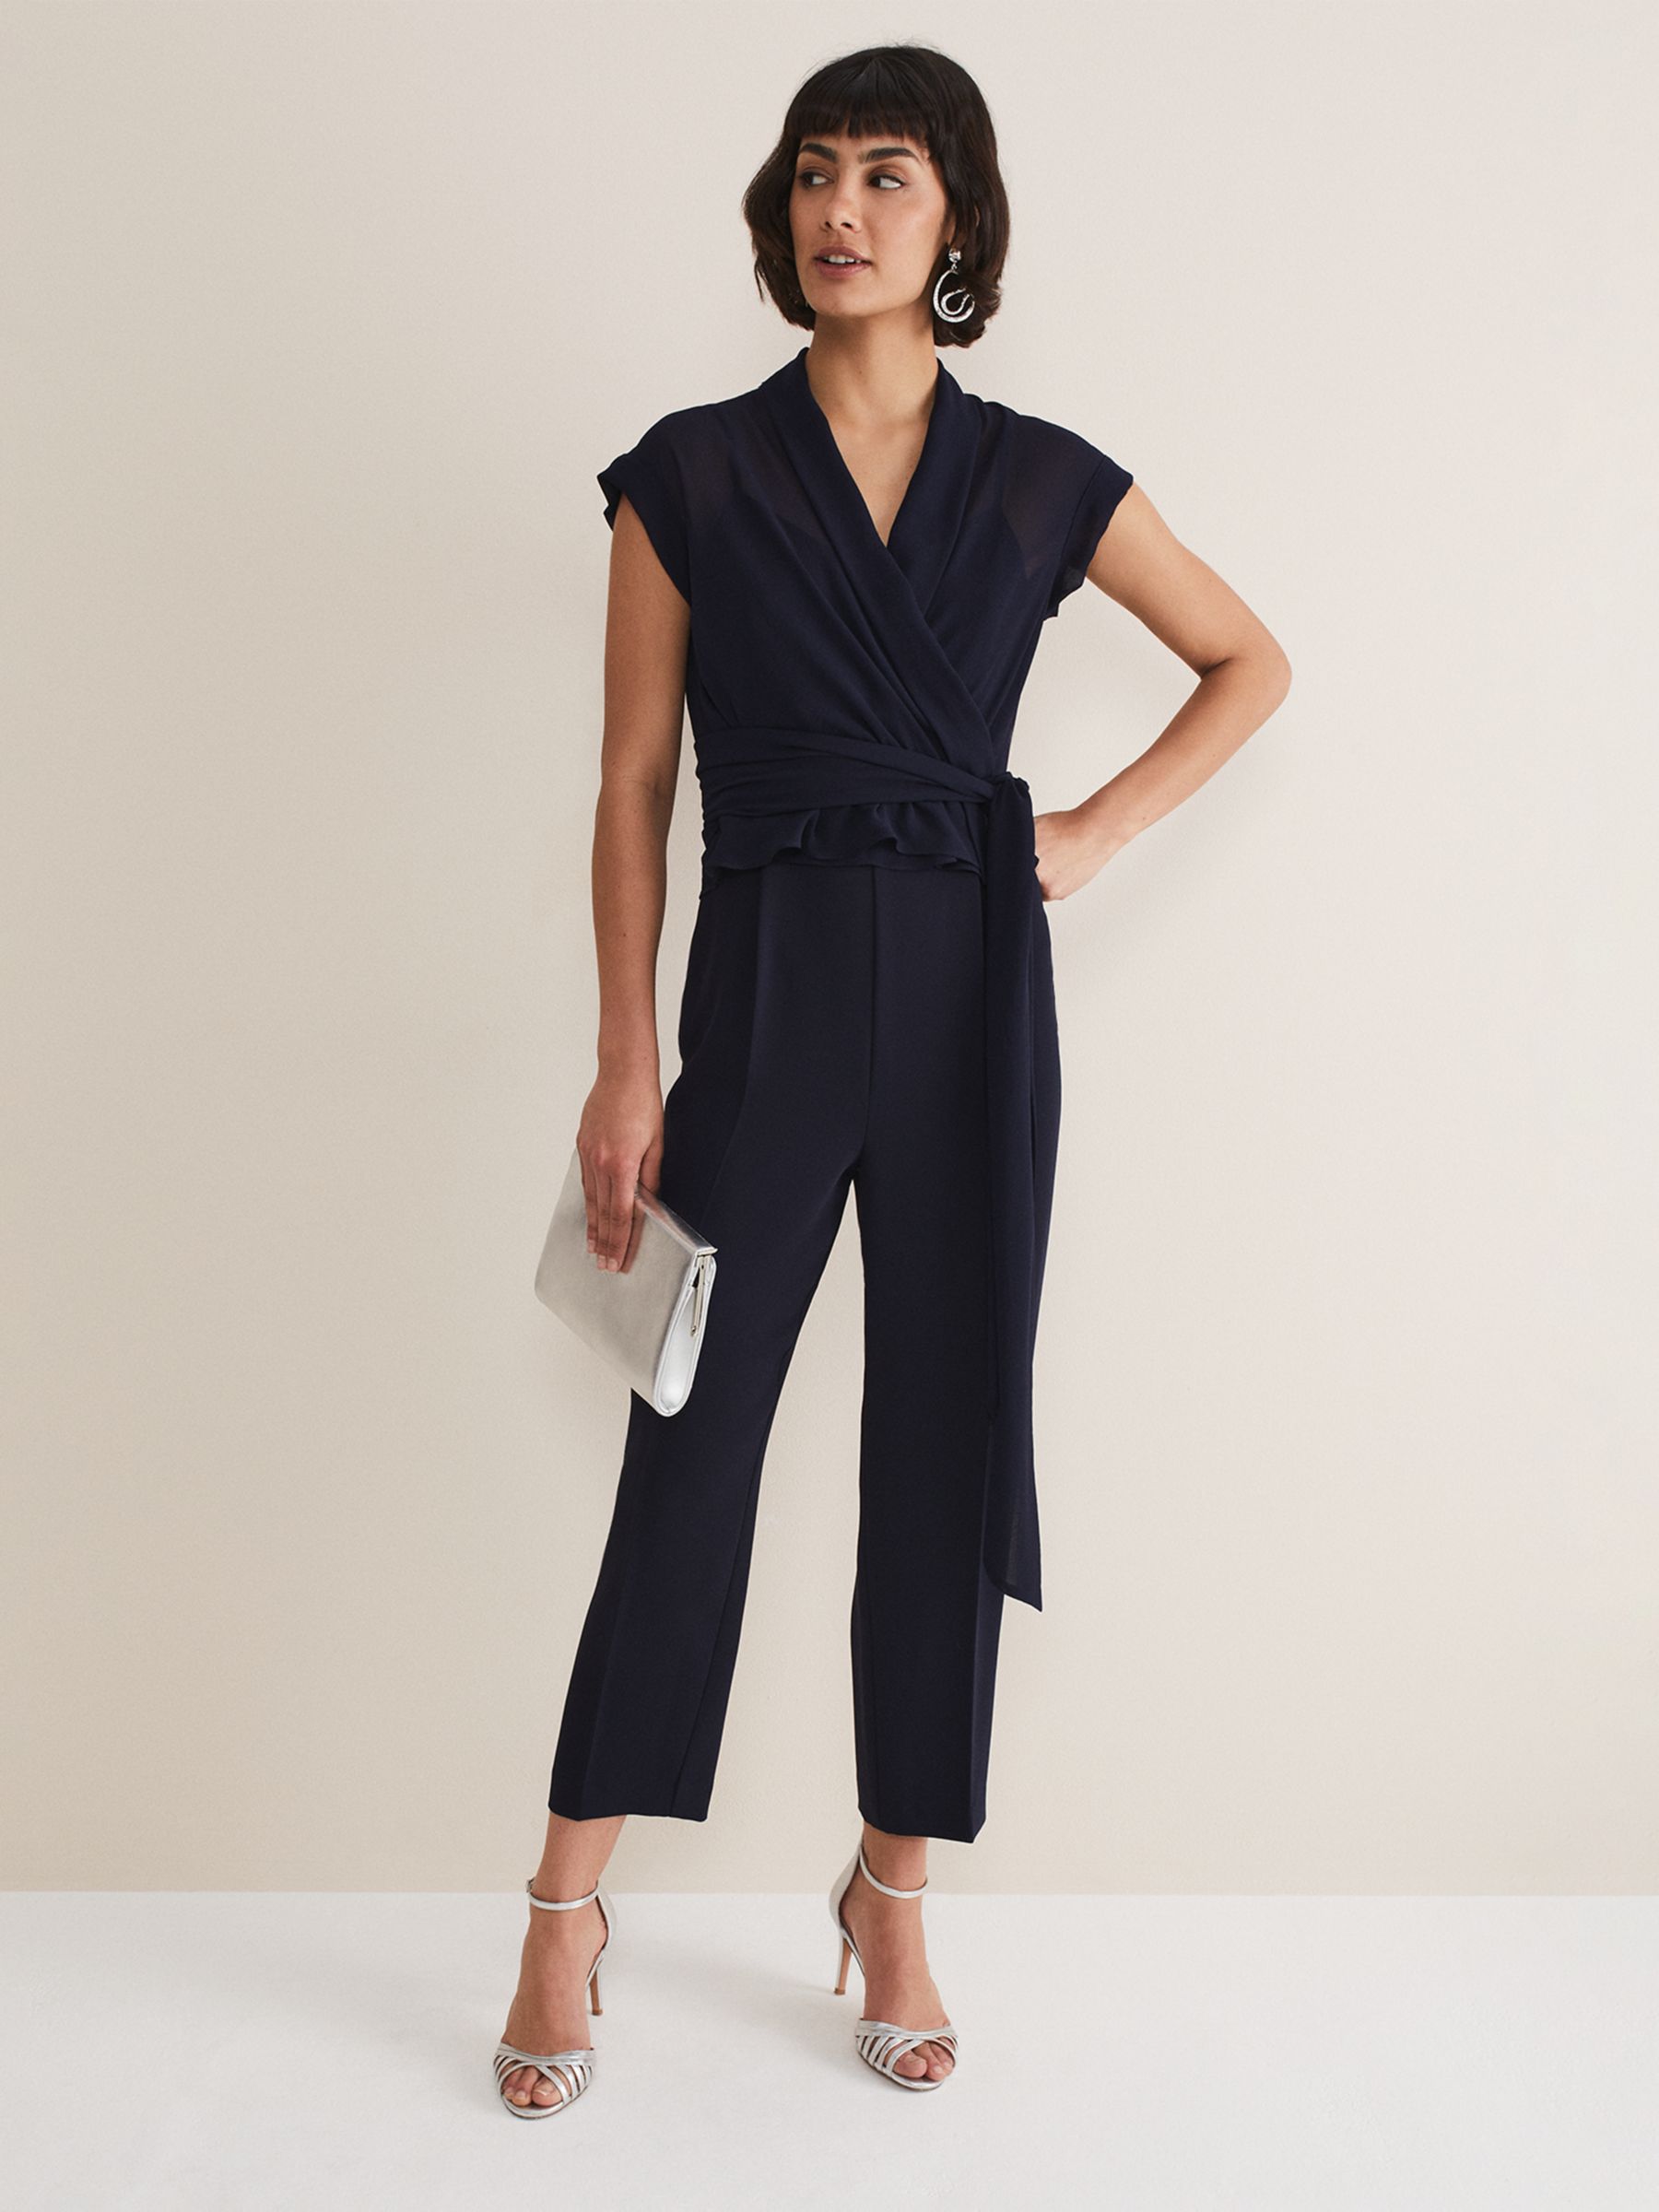 Buy Phase Eight Leonora Chiffon Overlay Jumpsuit, Navy Online at johnlewis.com